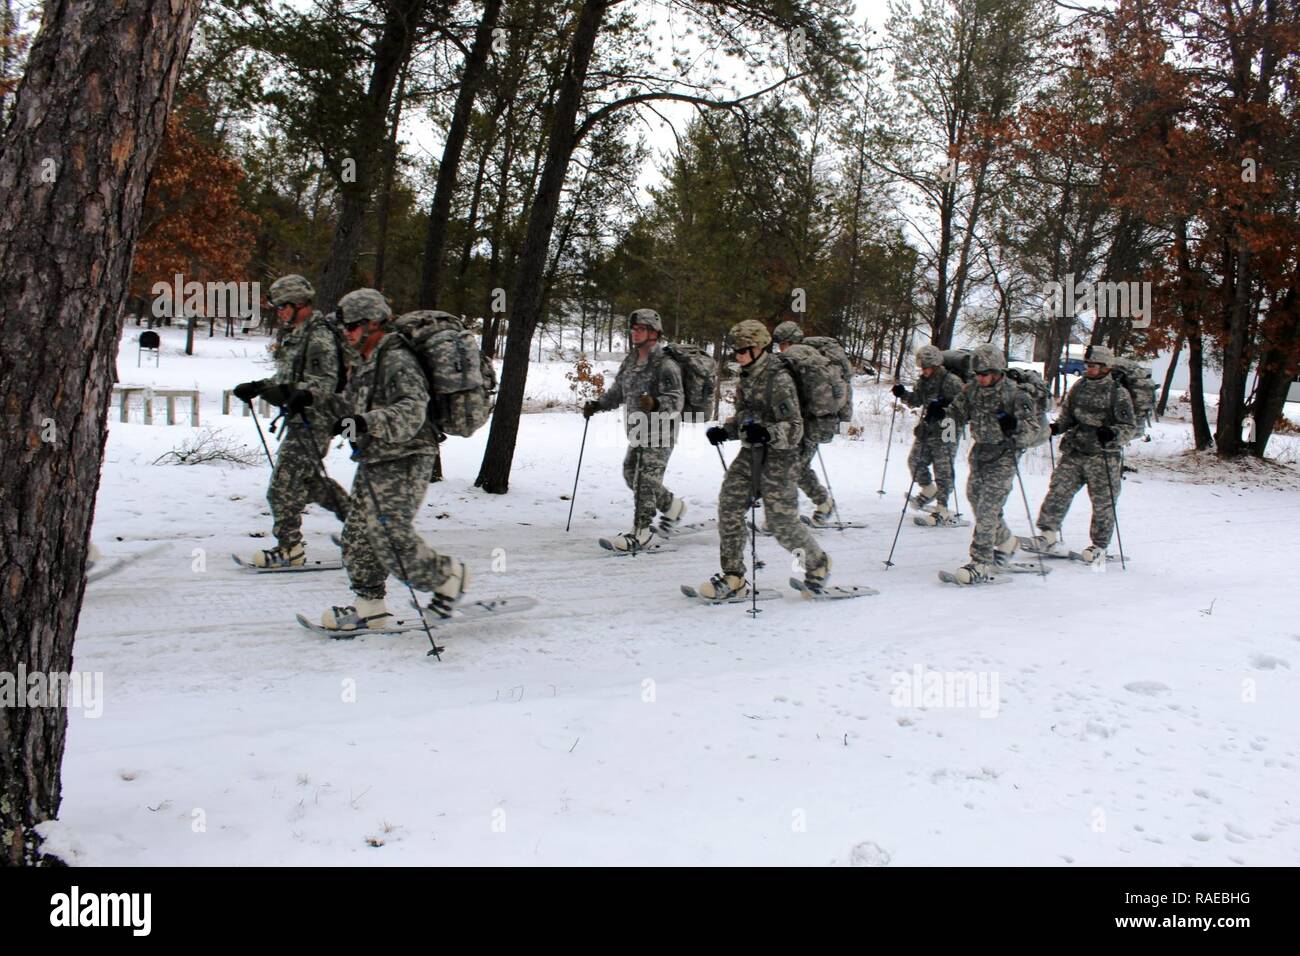 Soldiers with the 181st Multi-Functional Training Brigade participate in a snowshoe skills training session Jan. 26, 2017, at Training Area D-10 as part of the Cold-Weather Operations Course at Fort McCoy, Wis. The Cold-Weather Operations Course is the first of its kind coordinated by the Directorate of Plans, Mobilization, Training and Security, or DPTMS. It included participation by 11 Soldiers with the 181st and is taught by two instructors contracted to support DPTMS. Stock Photo